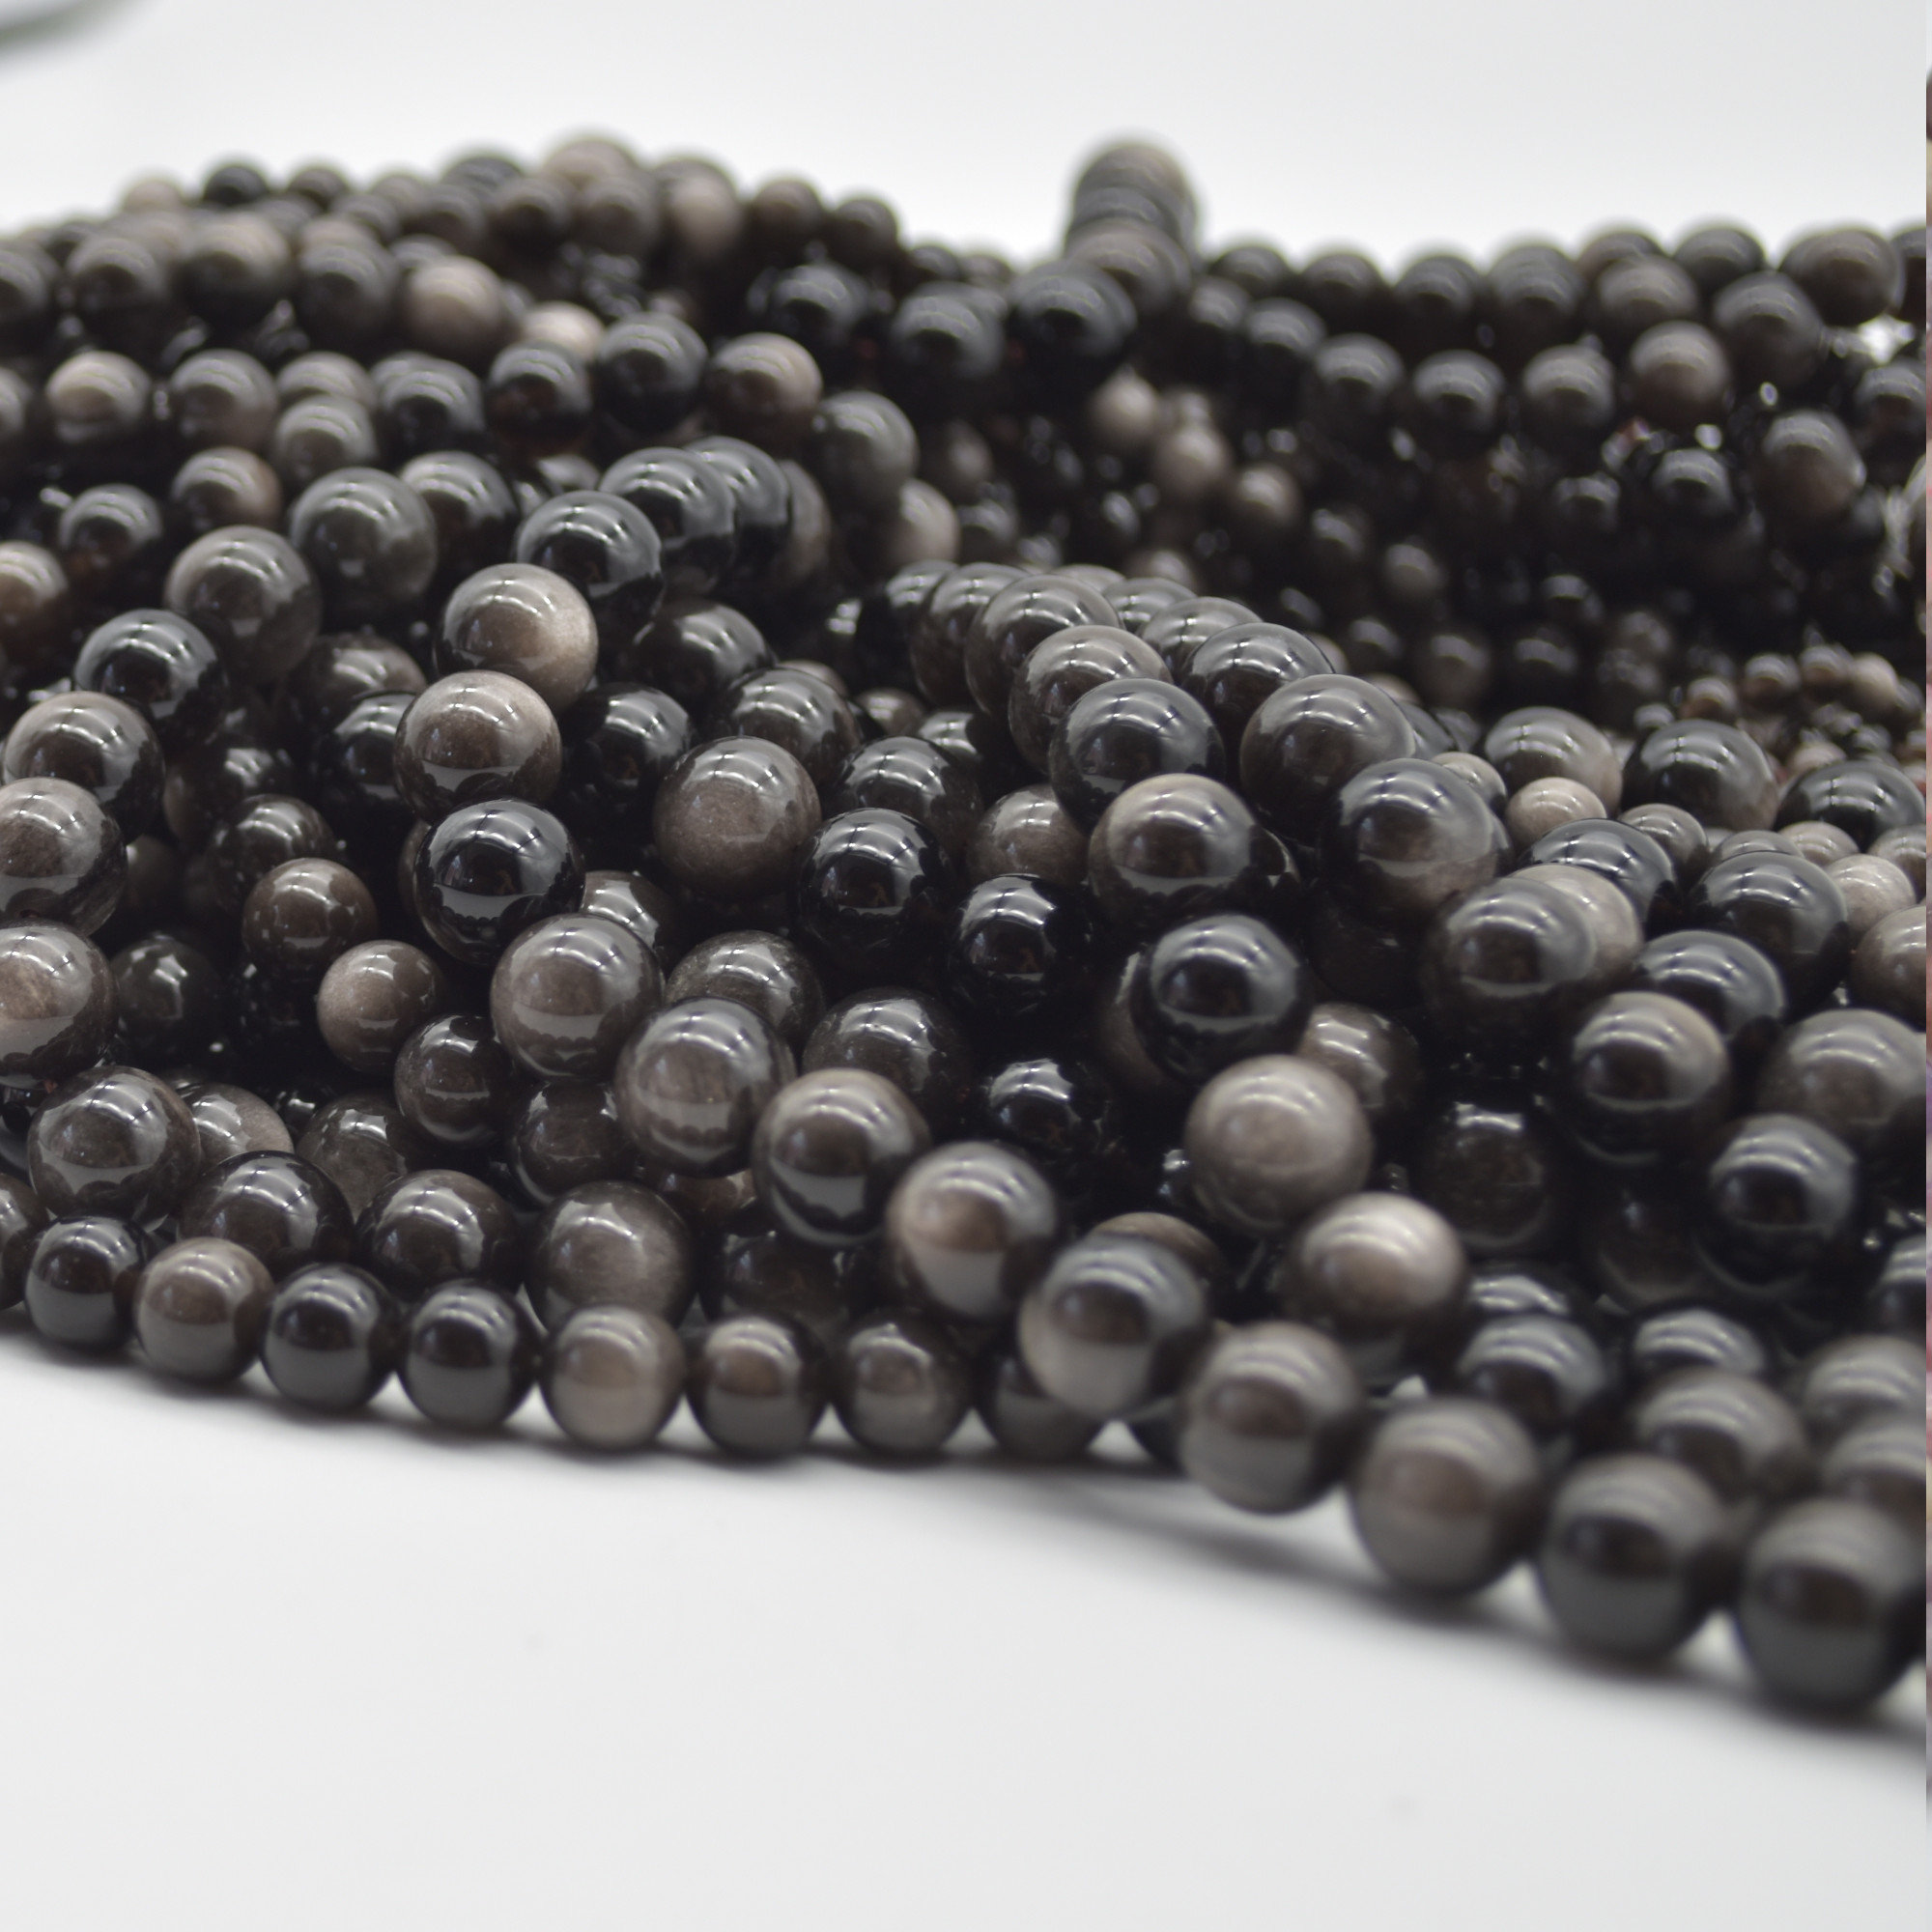 High Quality Grade A Natural Silver Sheen Obsidian Semi-precious Gemstone Round Beads - 4mm, 6mm, 8mm, 10mm Sizes - 15" Strand